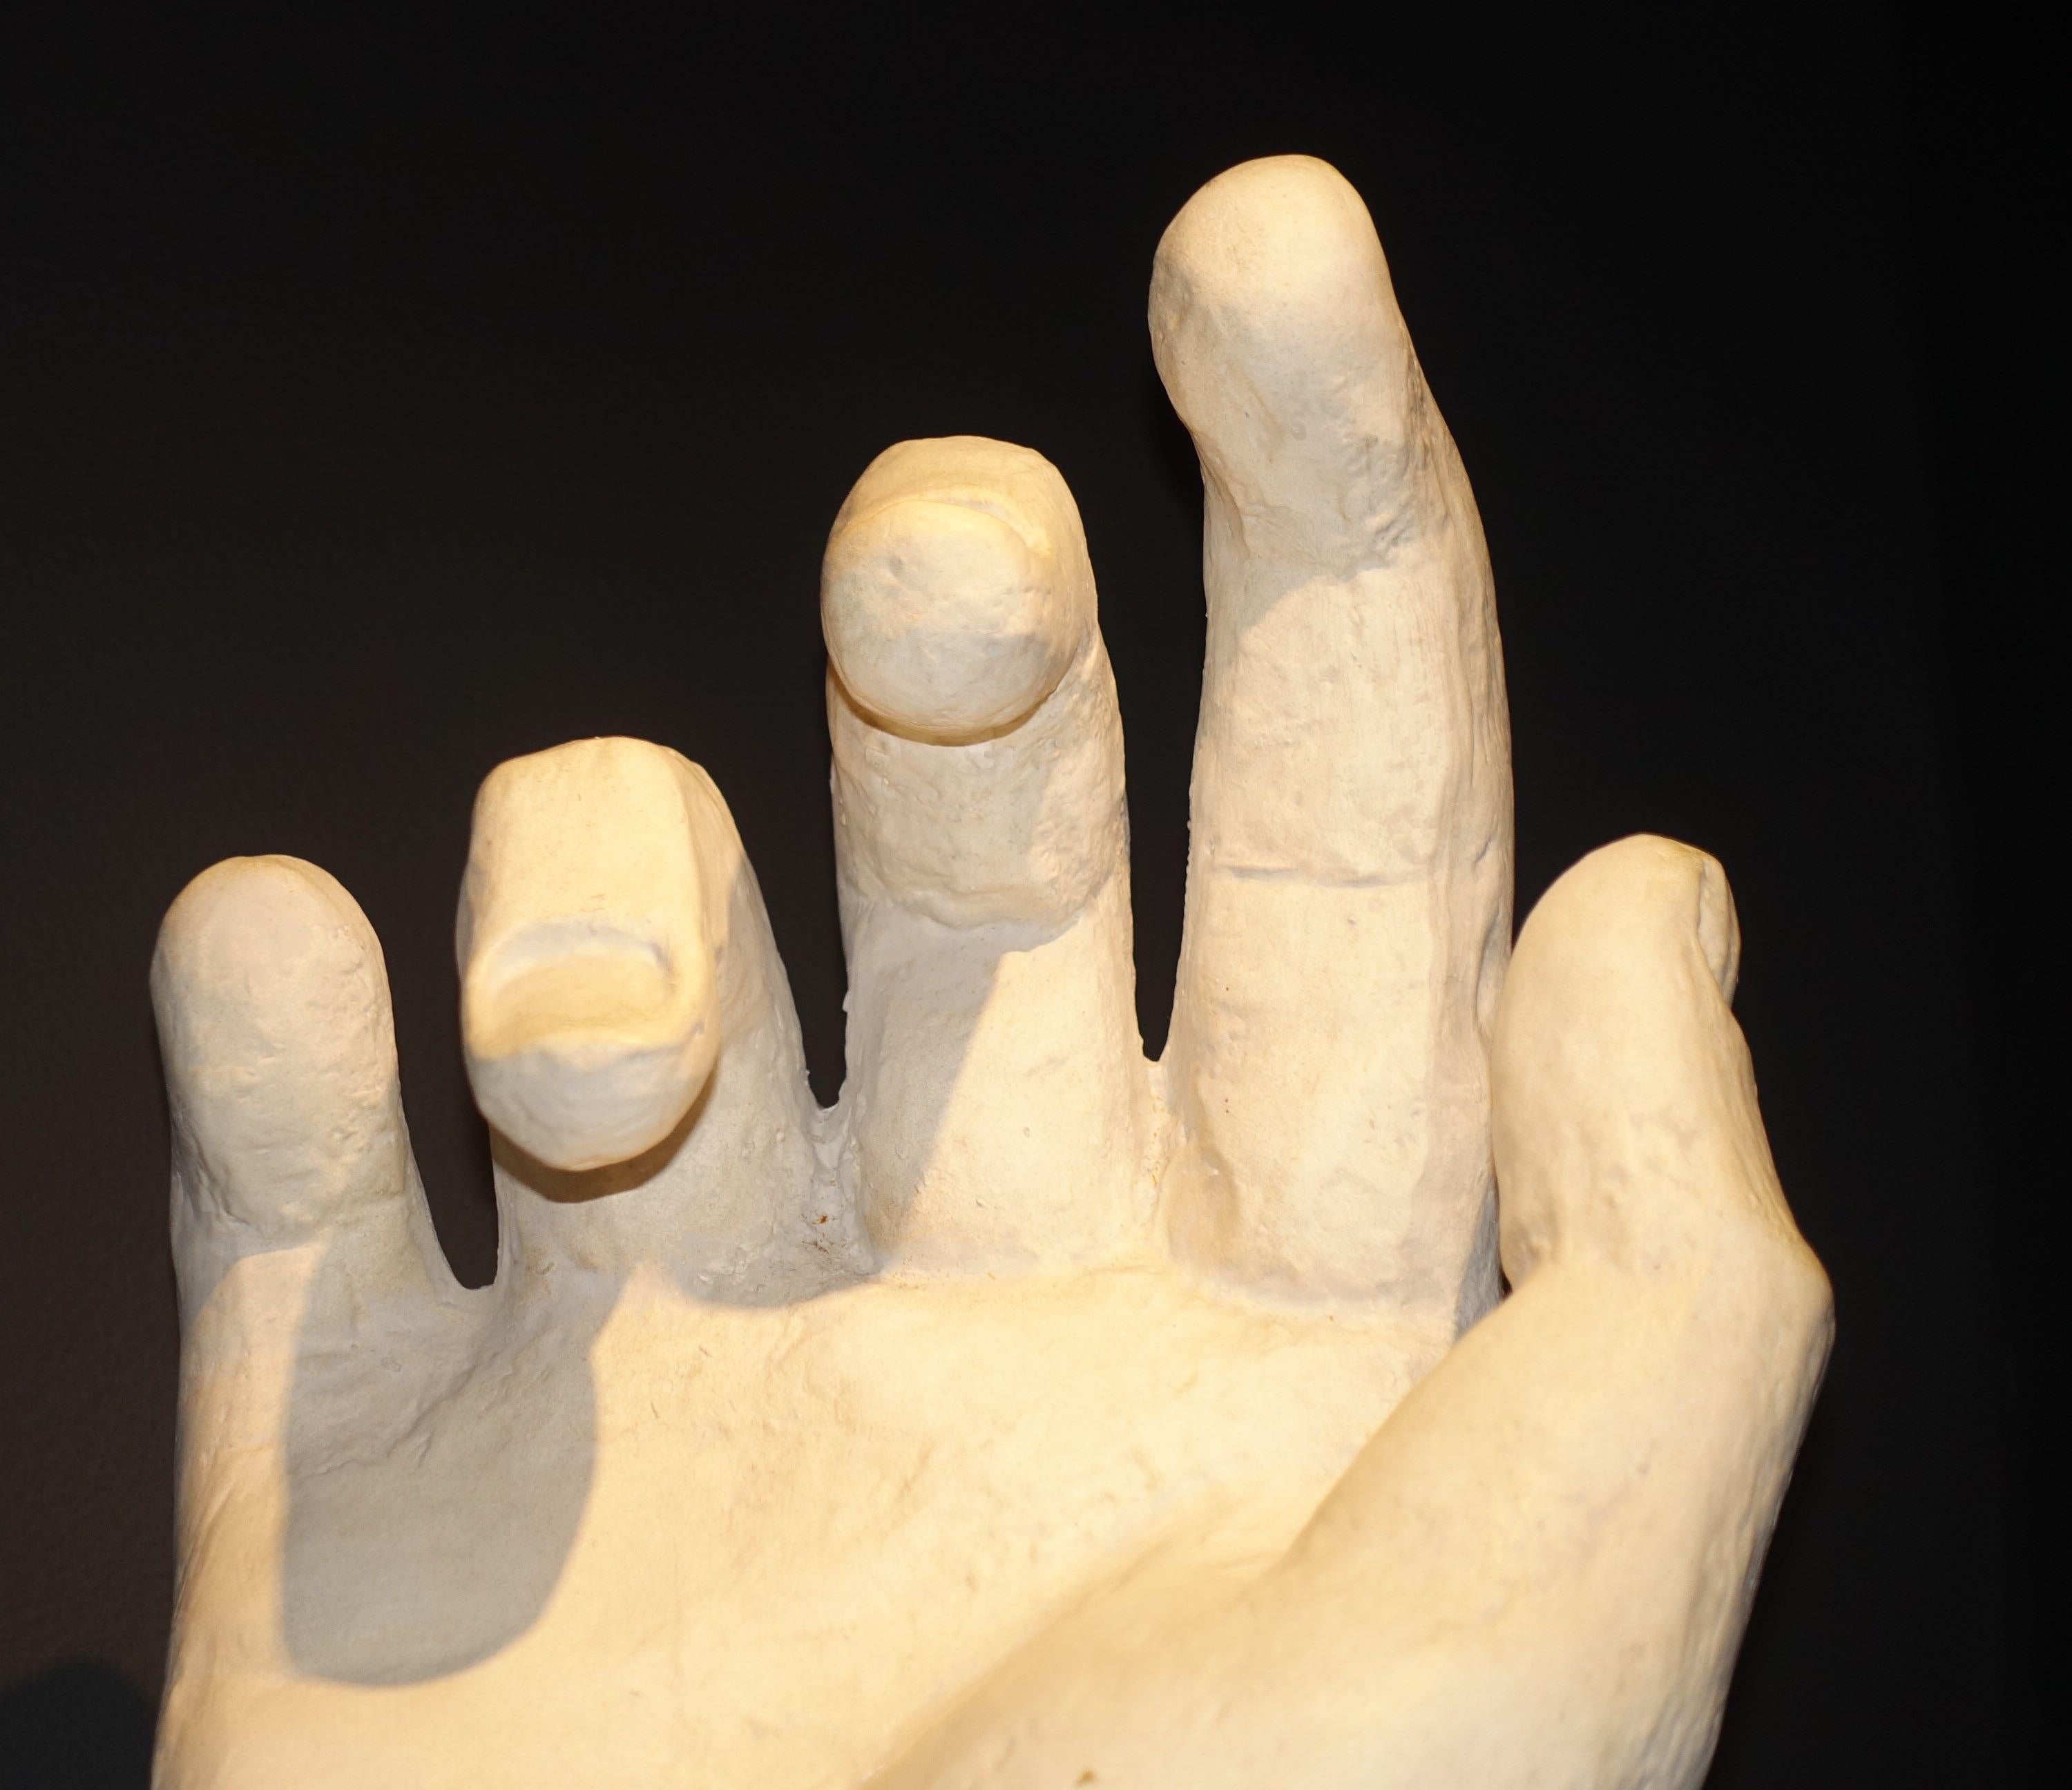 Contemporary French large white plaster hand
Often used as artist model.